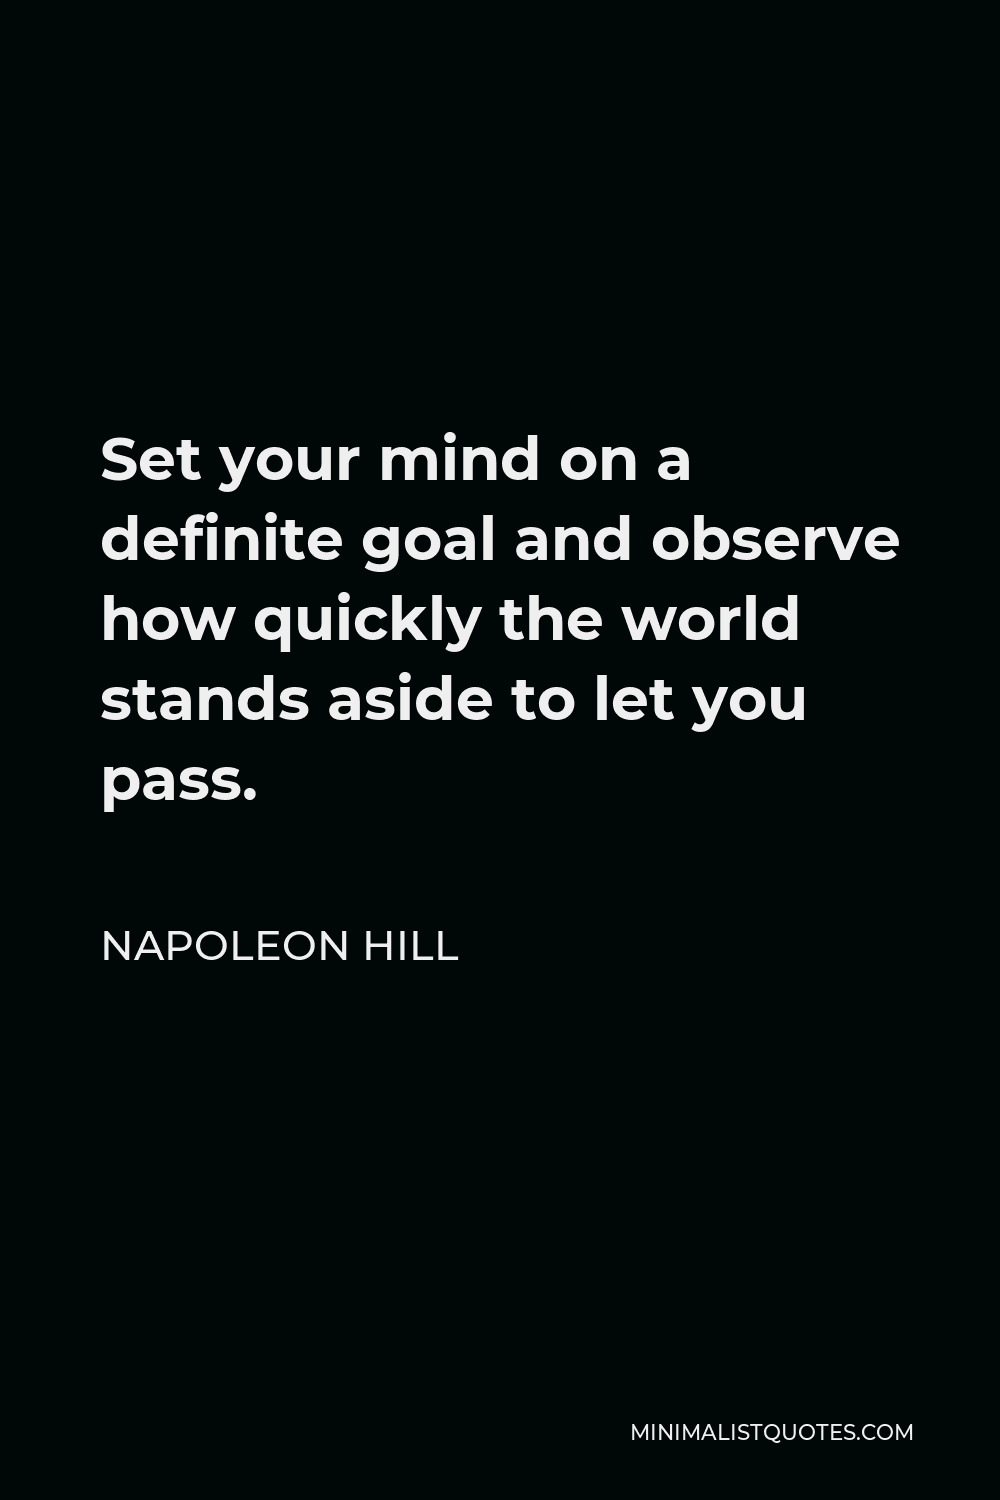 Napoleon Hill Quote - Set your mind on a definite goal and observe how quickly the world stands aside to let you pass.